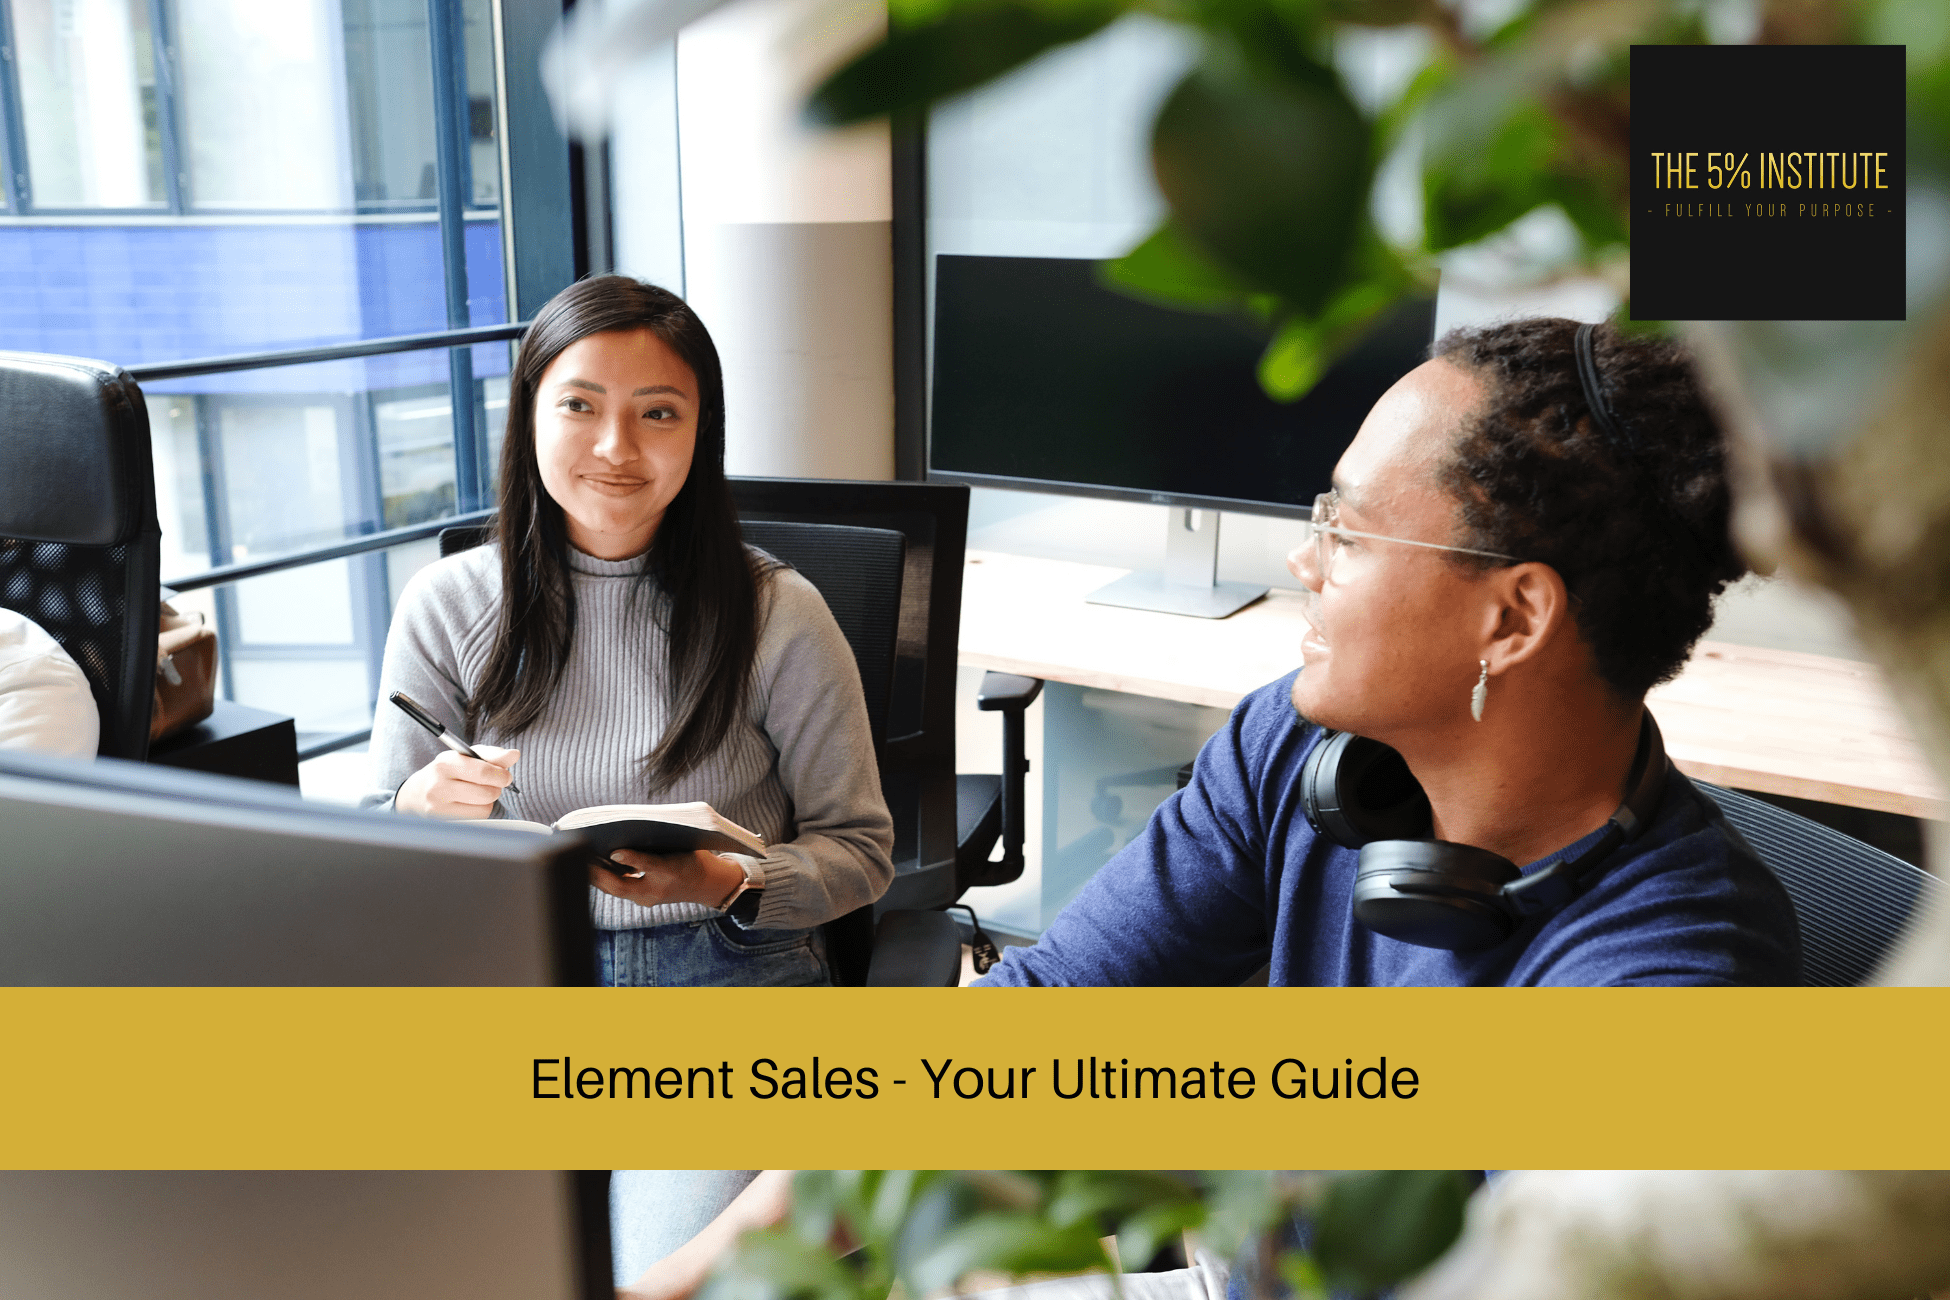 Element Sales - Your Ultimate Guide